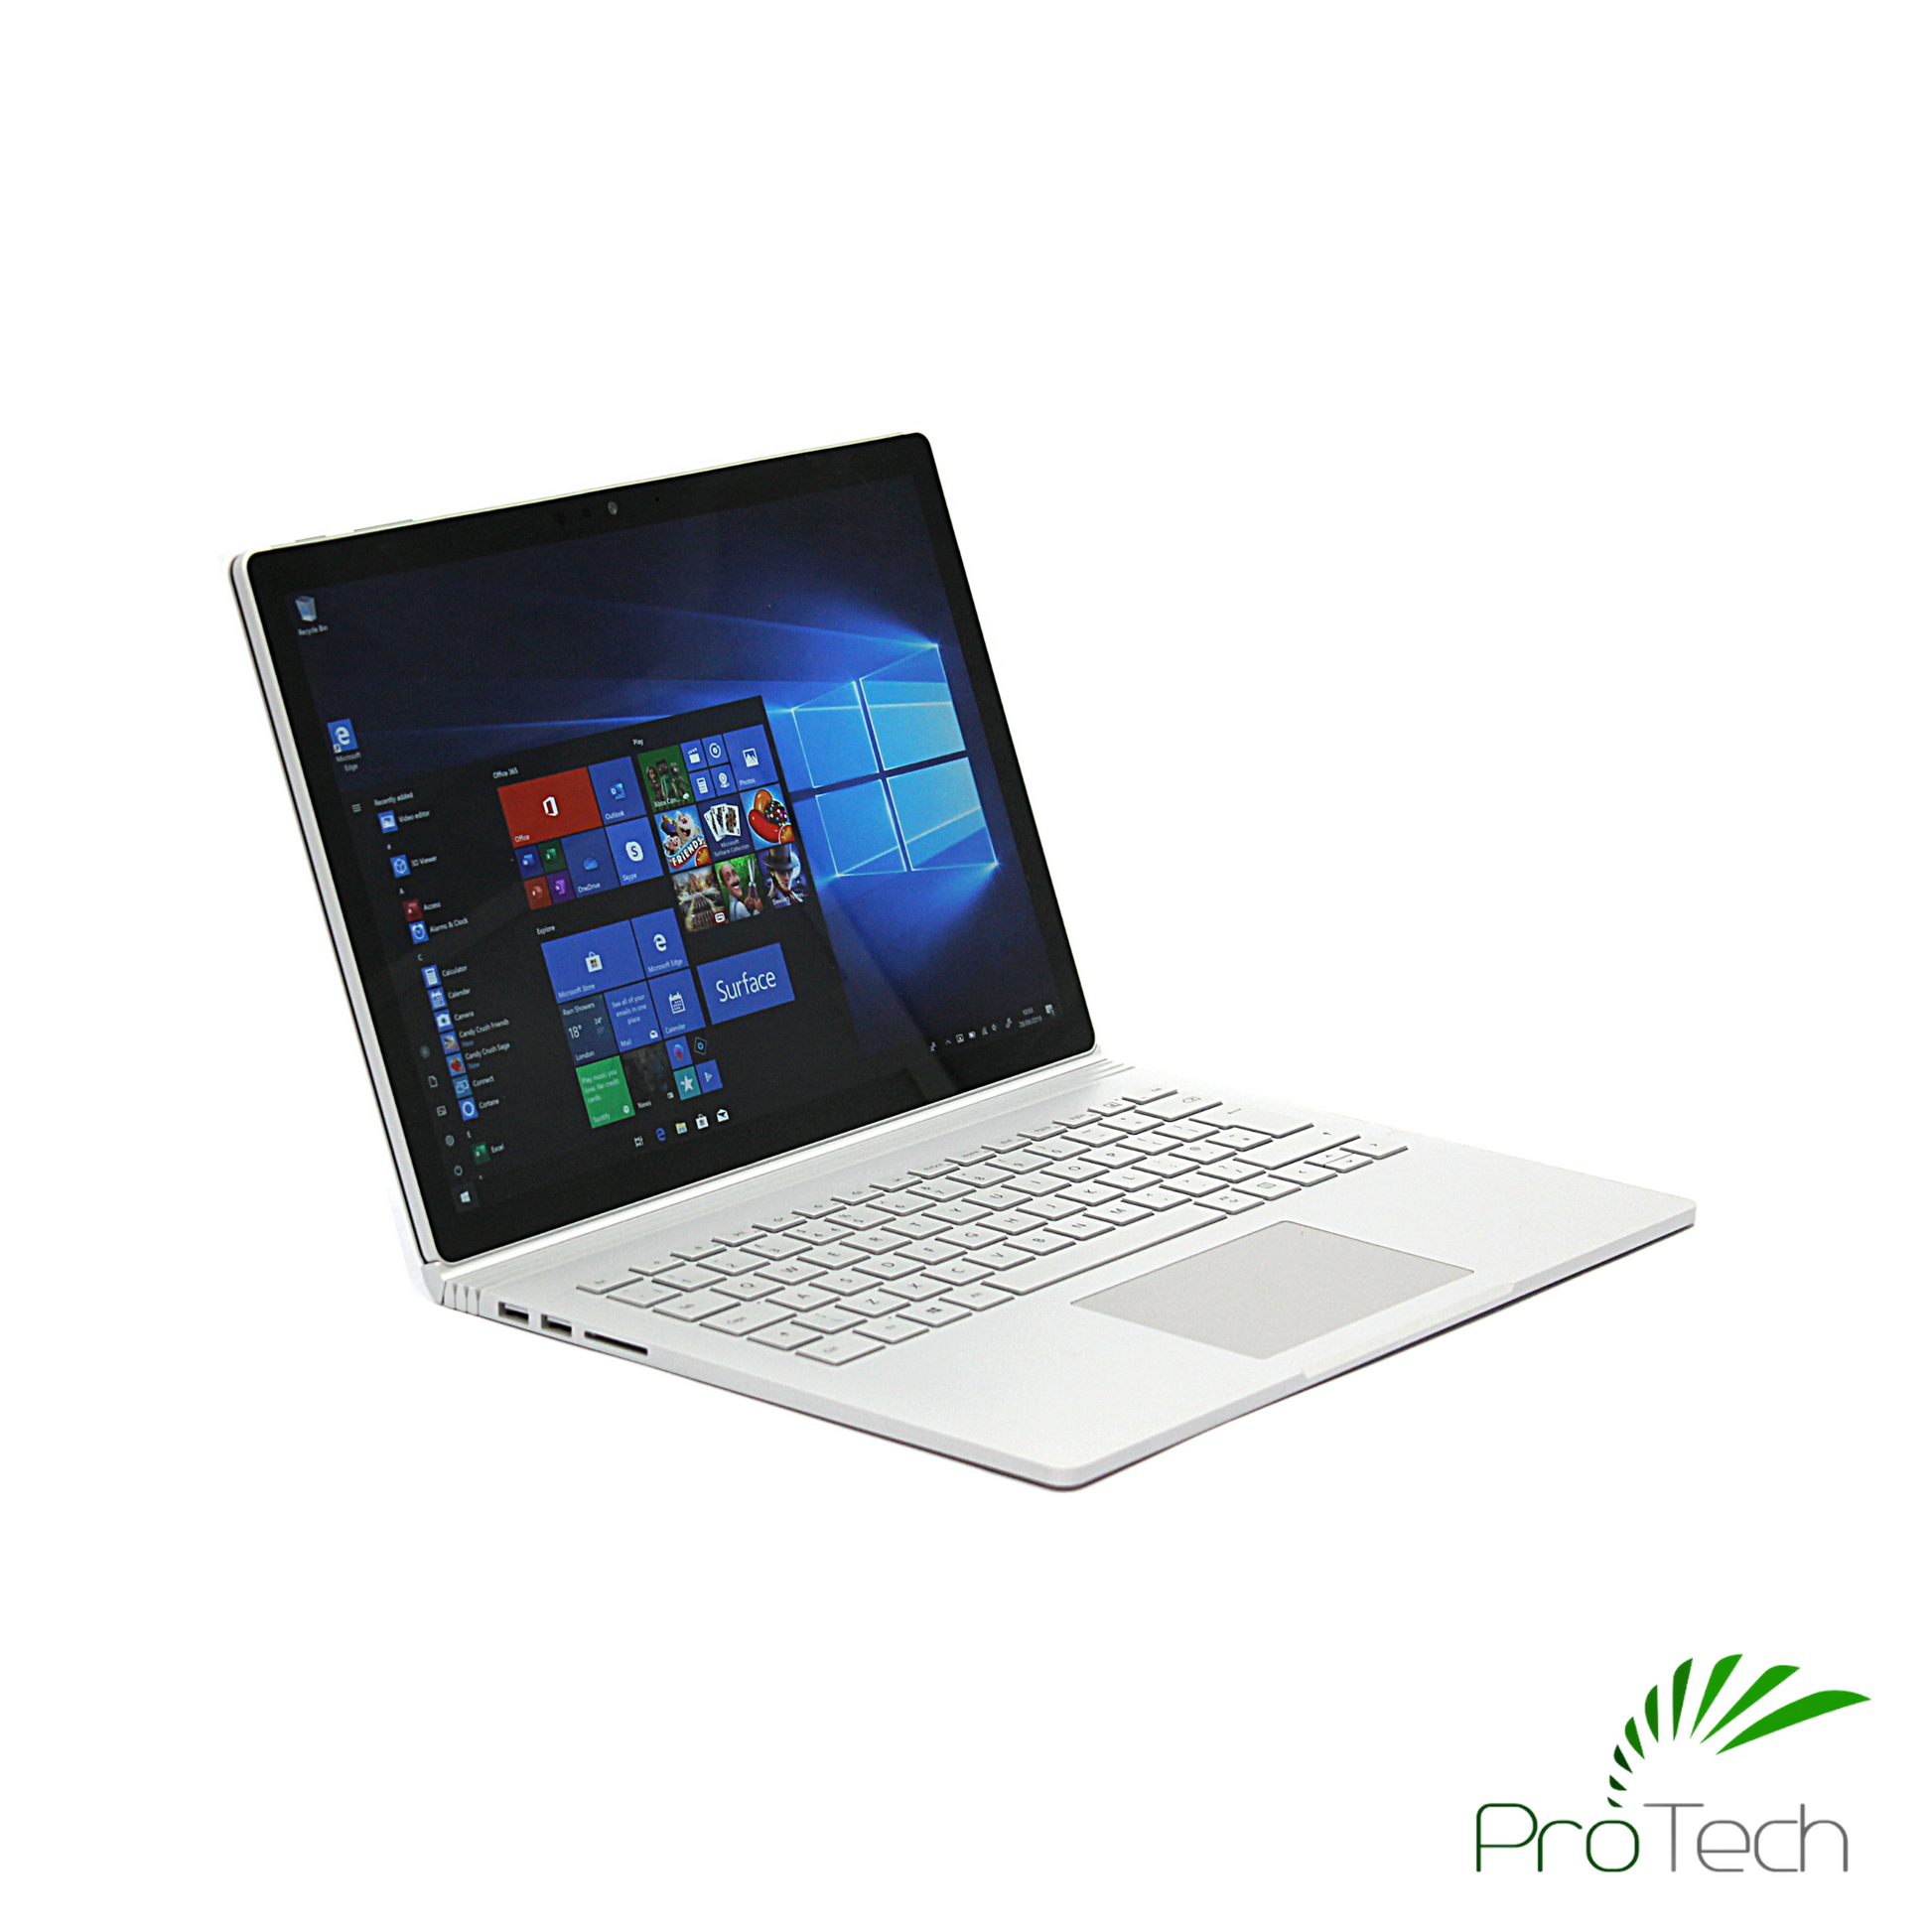 Microsoft Surface Book 2 13" | Core i7 | 8GB RAM | 256GB SSD ProTech I.T. Solutions